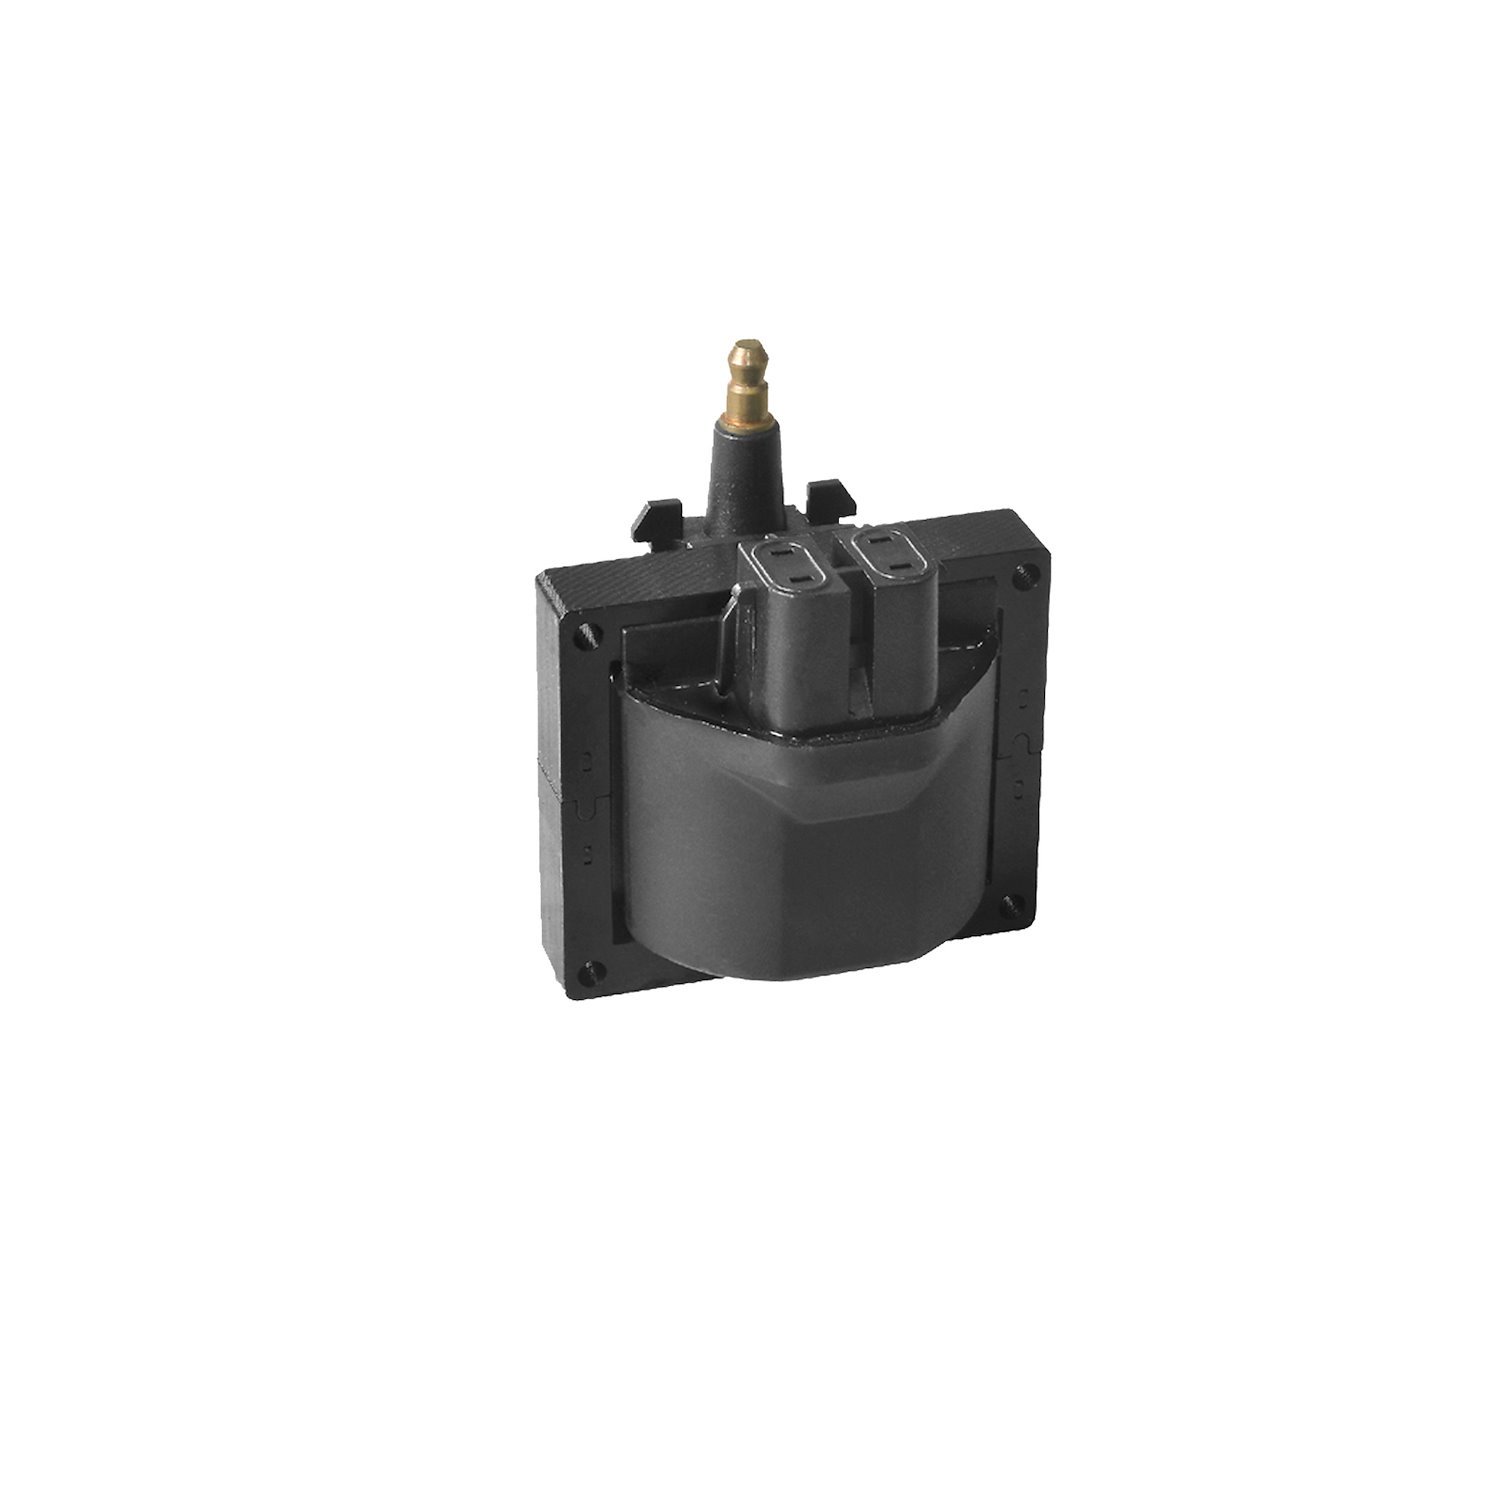 OE Replacement Ignition Coil for Pontiac, Chevrolet, Cadillac